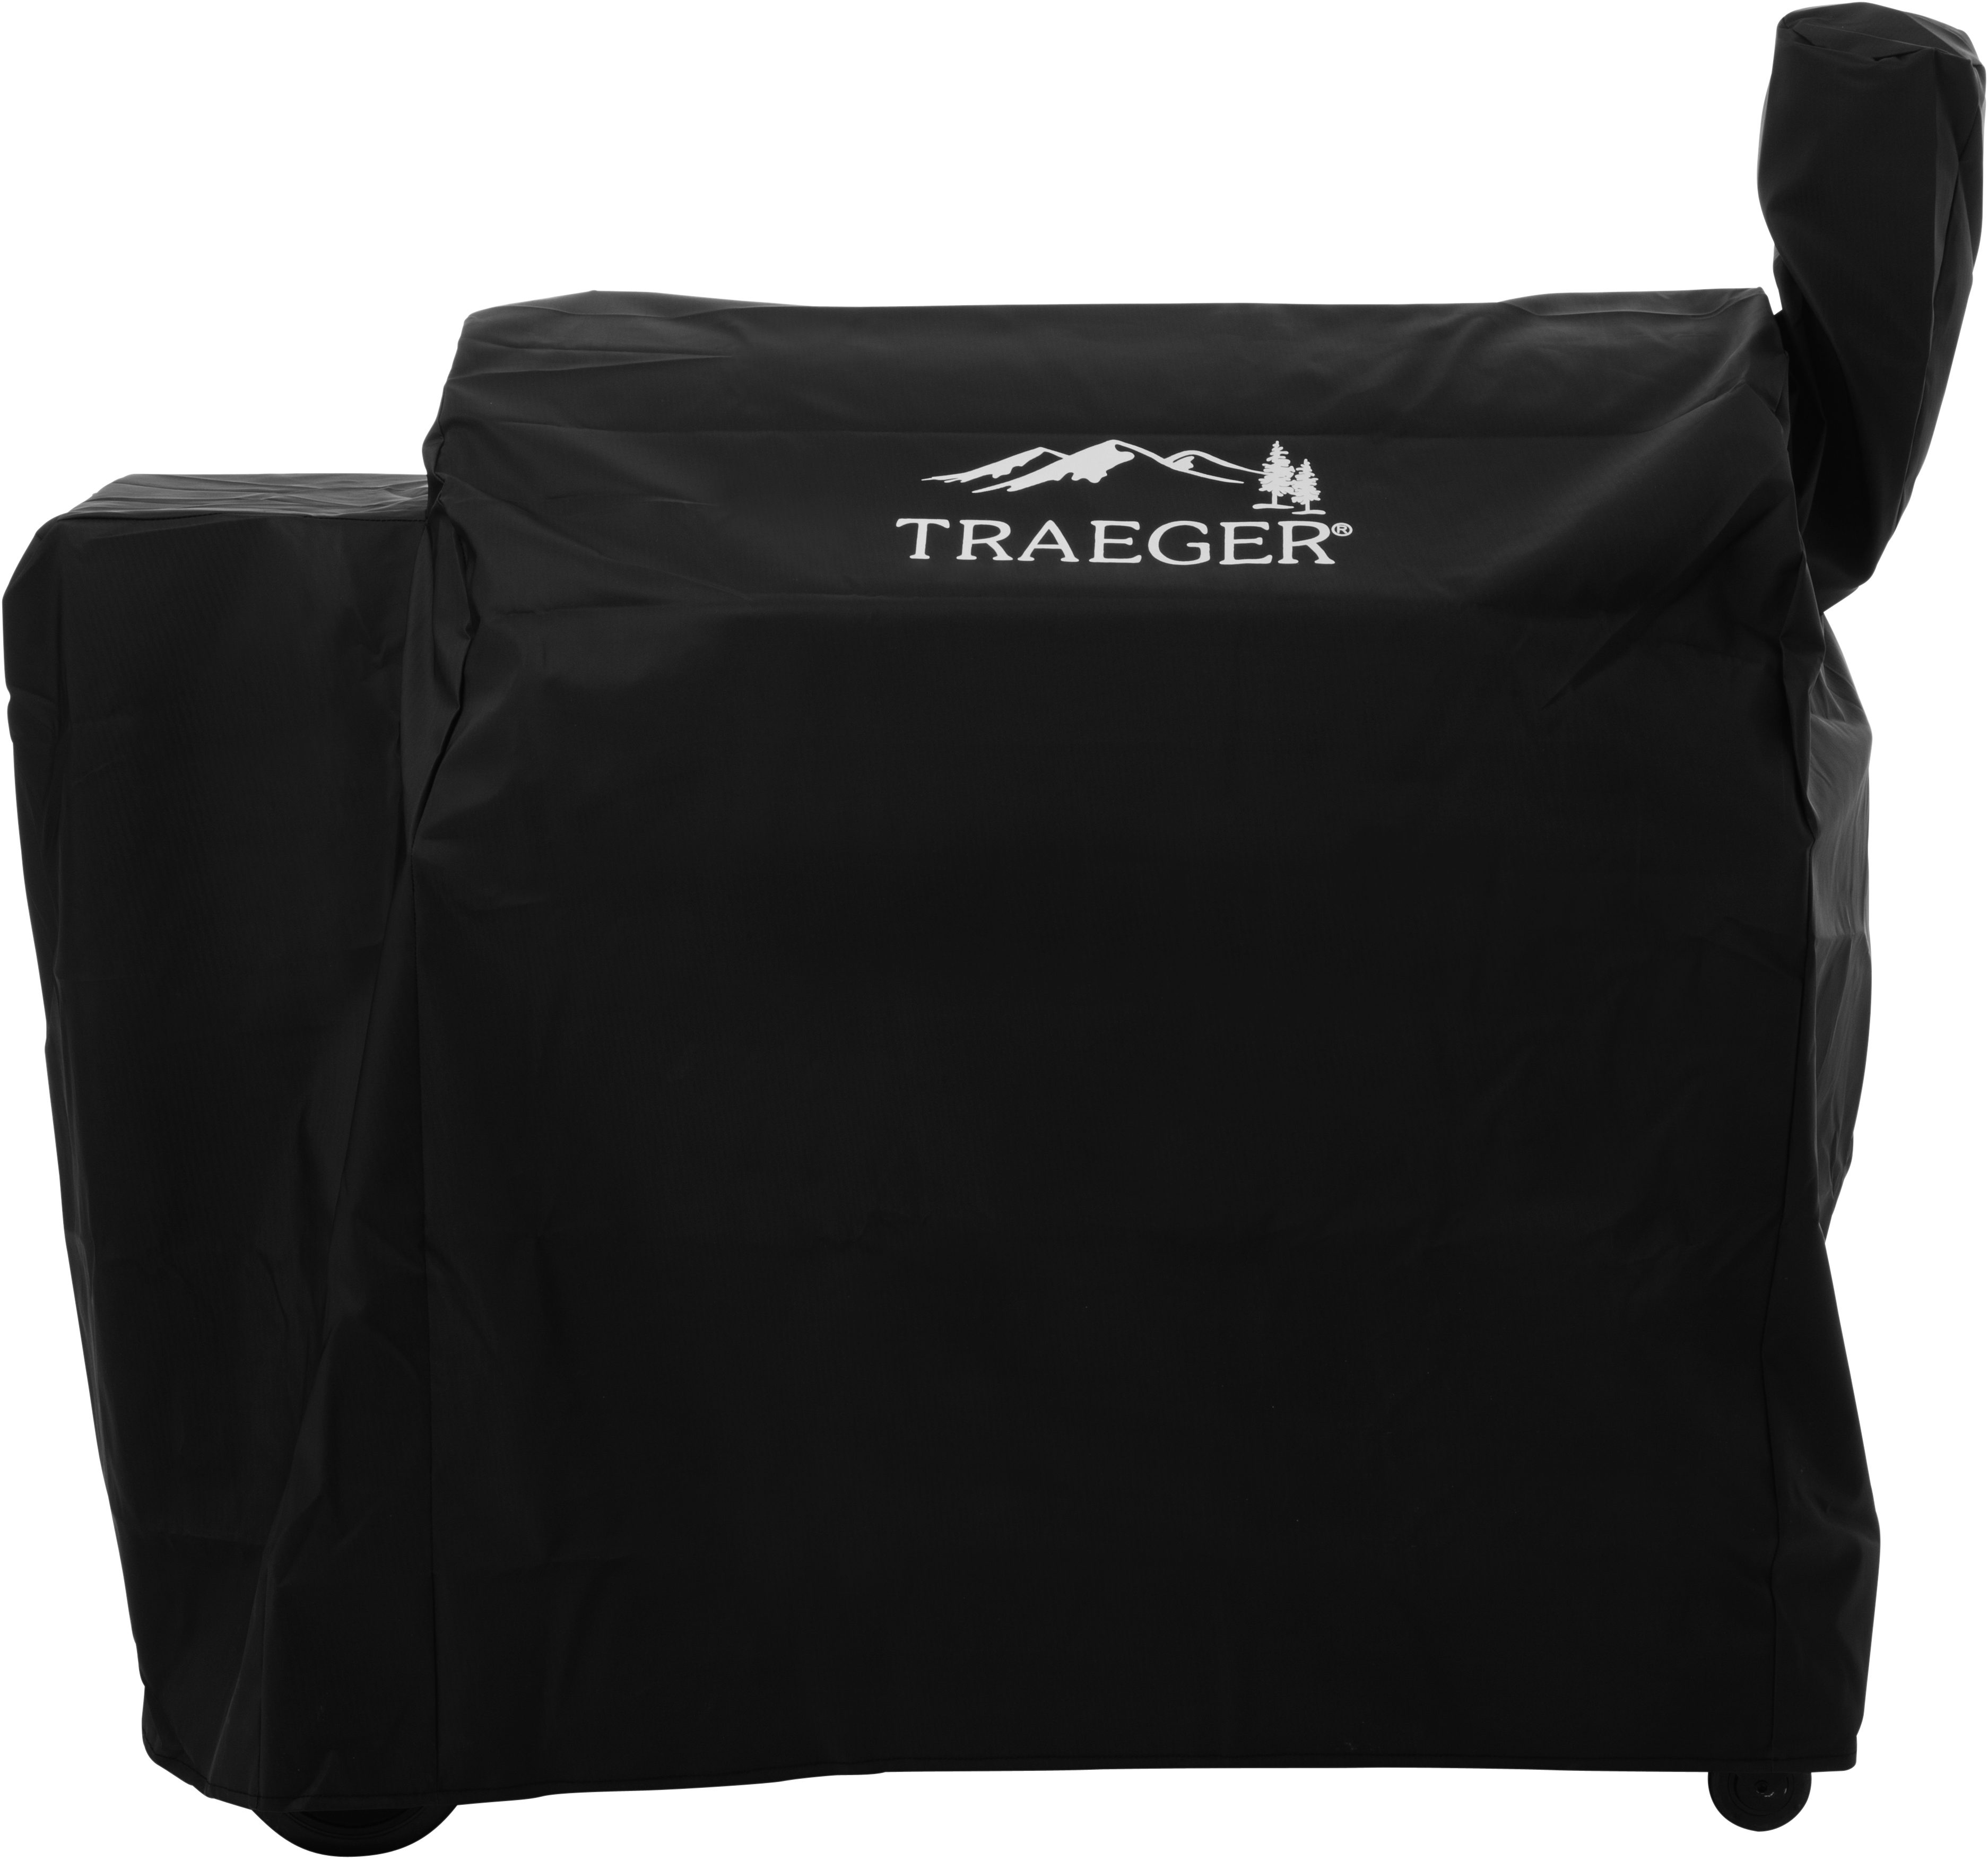 Traeger Pro 34 Full-Length Grill Cover